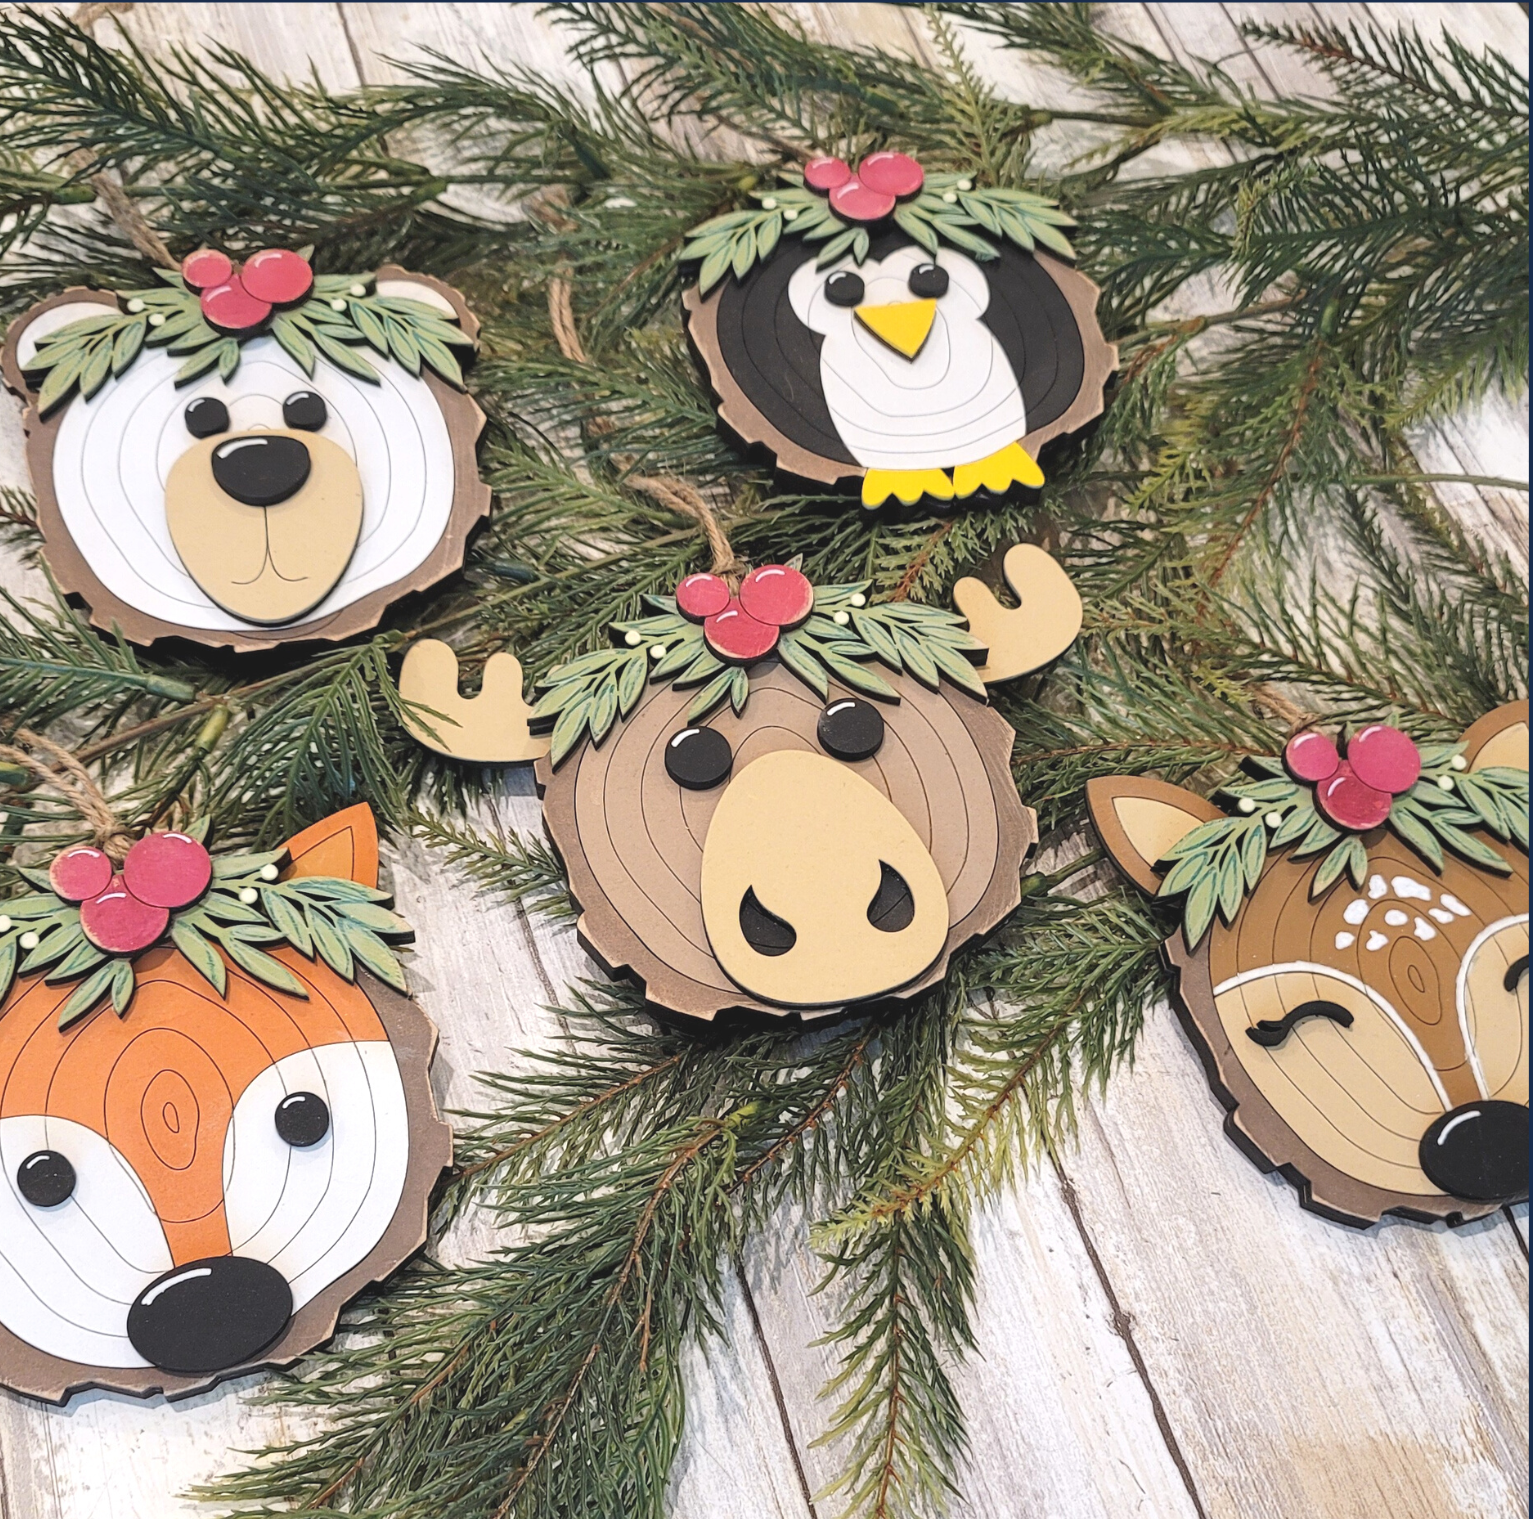 DIY Wood Slice Ornaments: make your own using napkins!